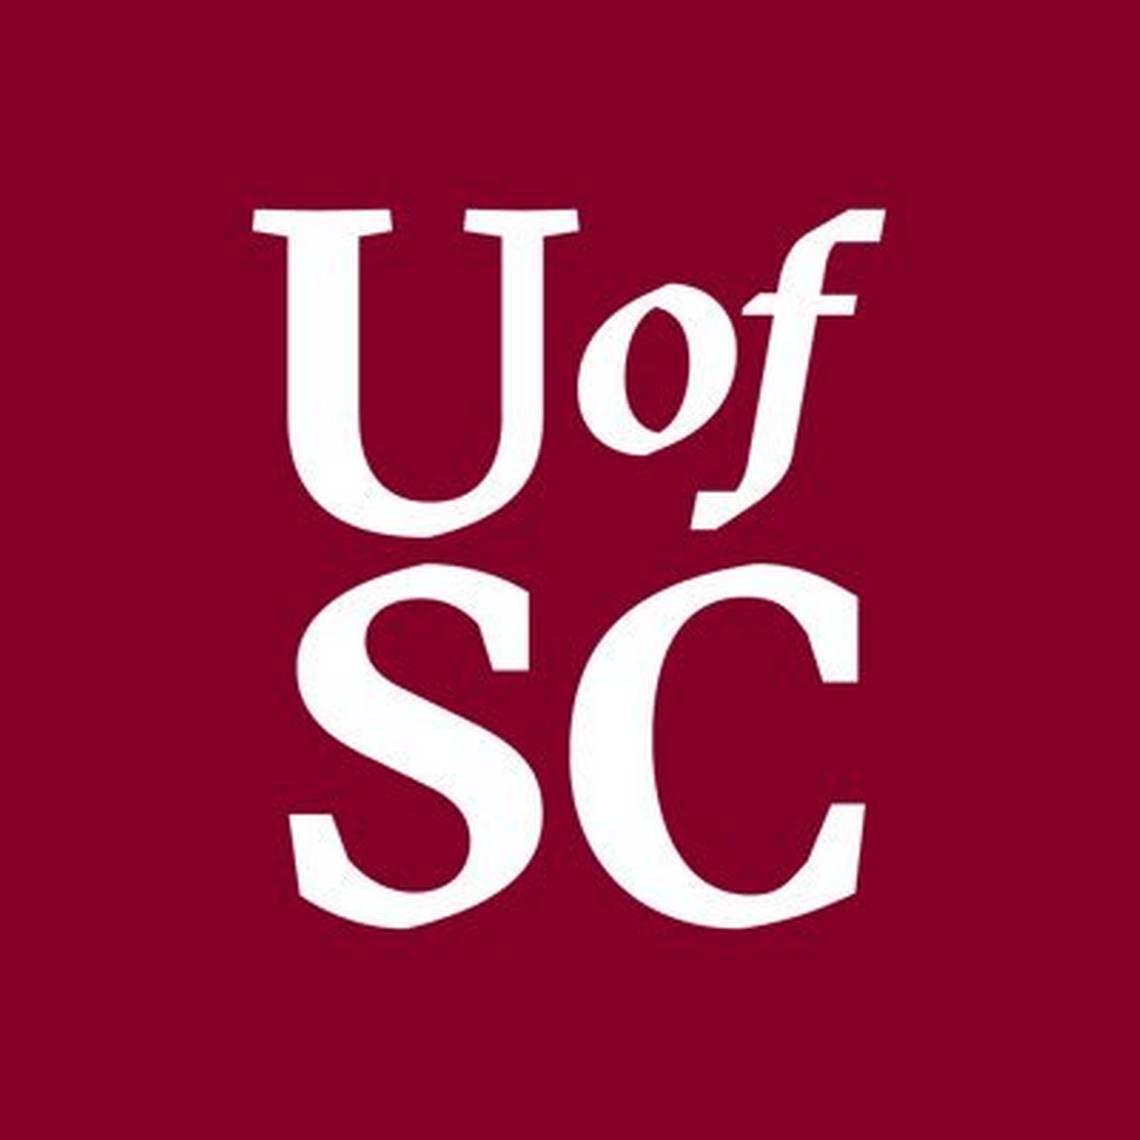 USC Logo - USC brand change was to distinguish from Southern California | The State